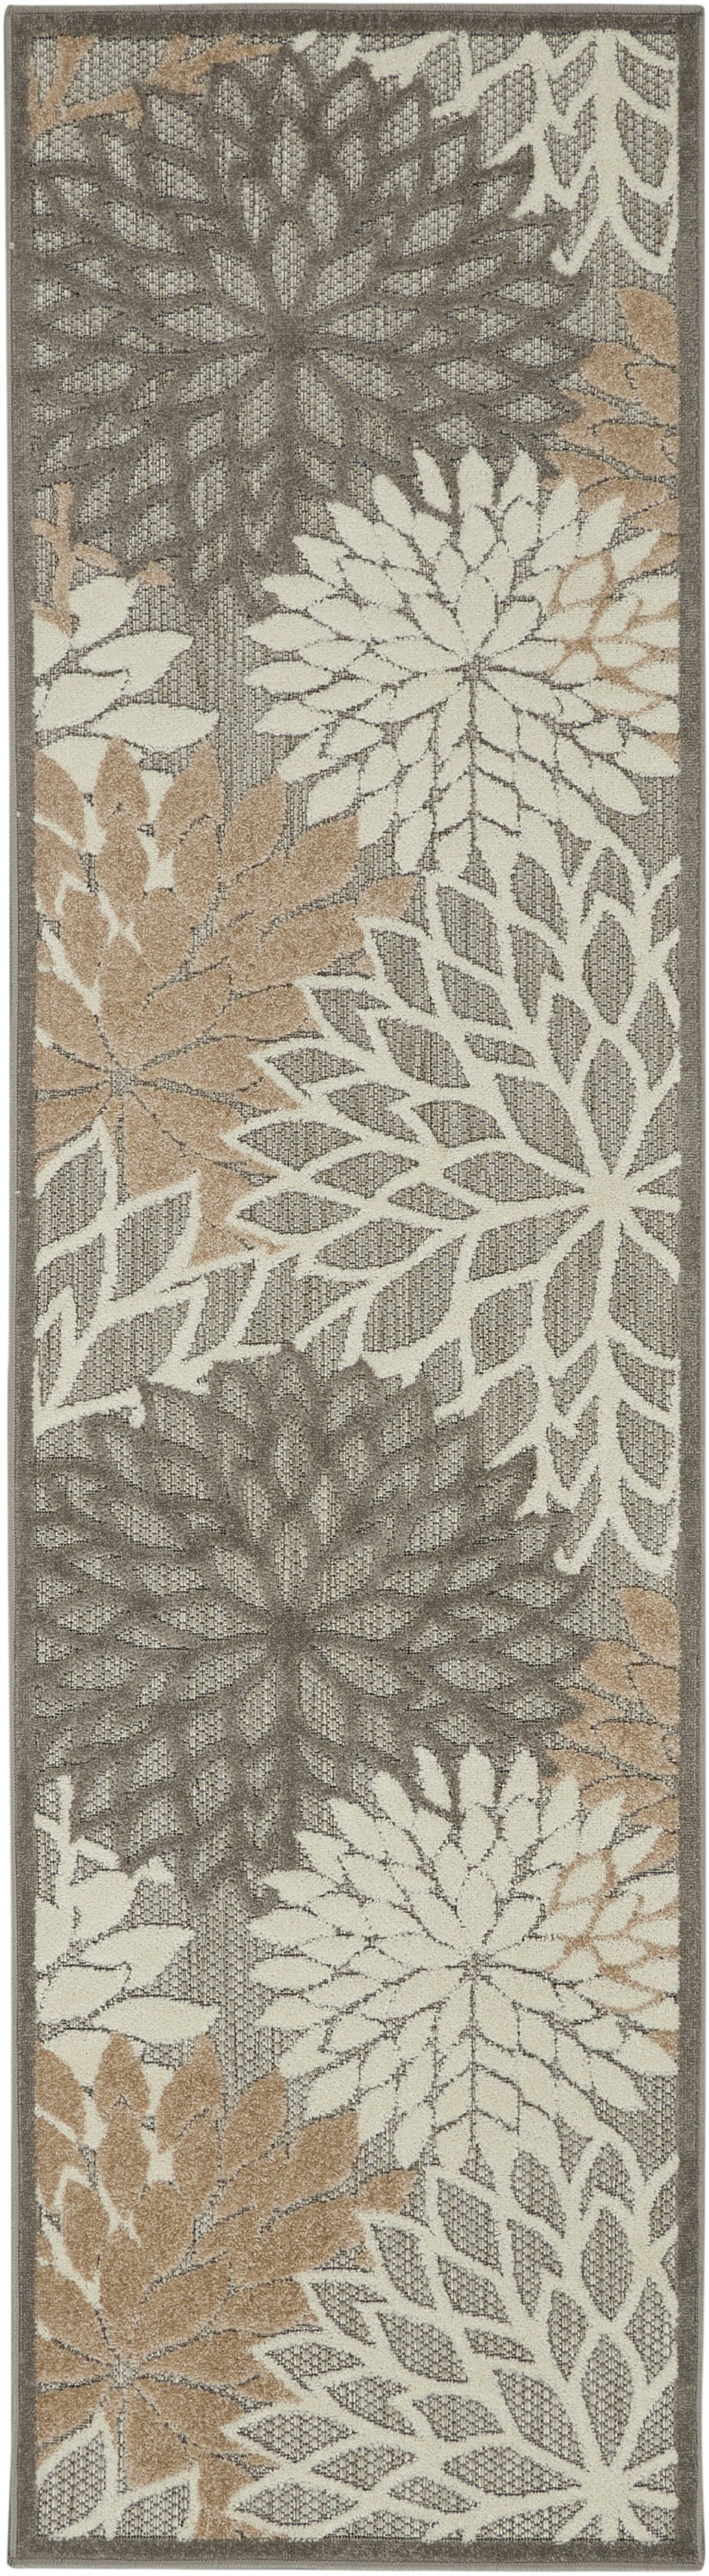 2' X 10' Gray And Ivory Floral Indoor Outdoor Area Rug-384652-1